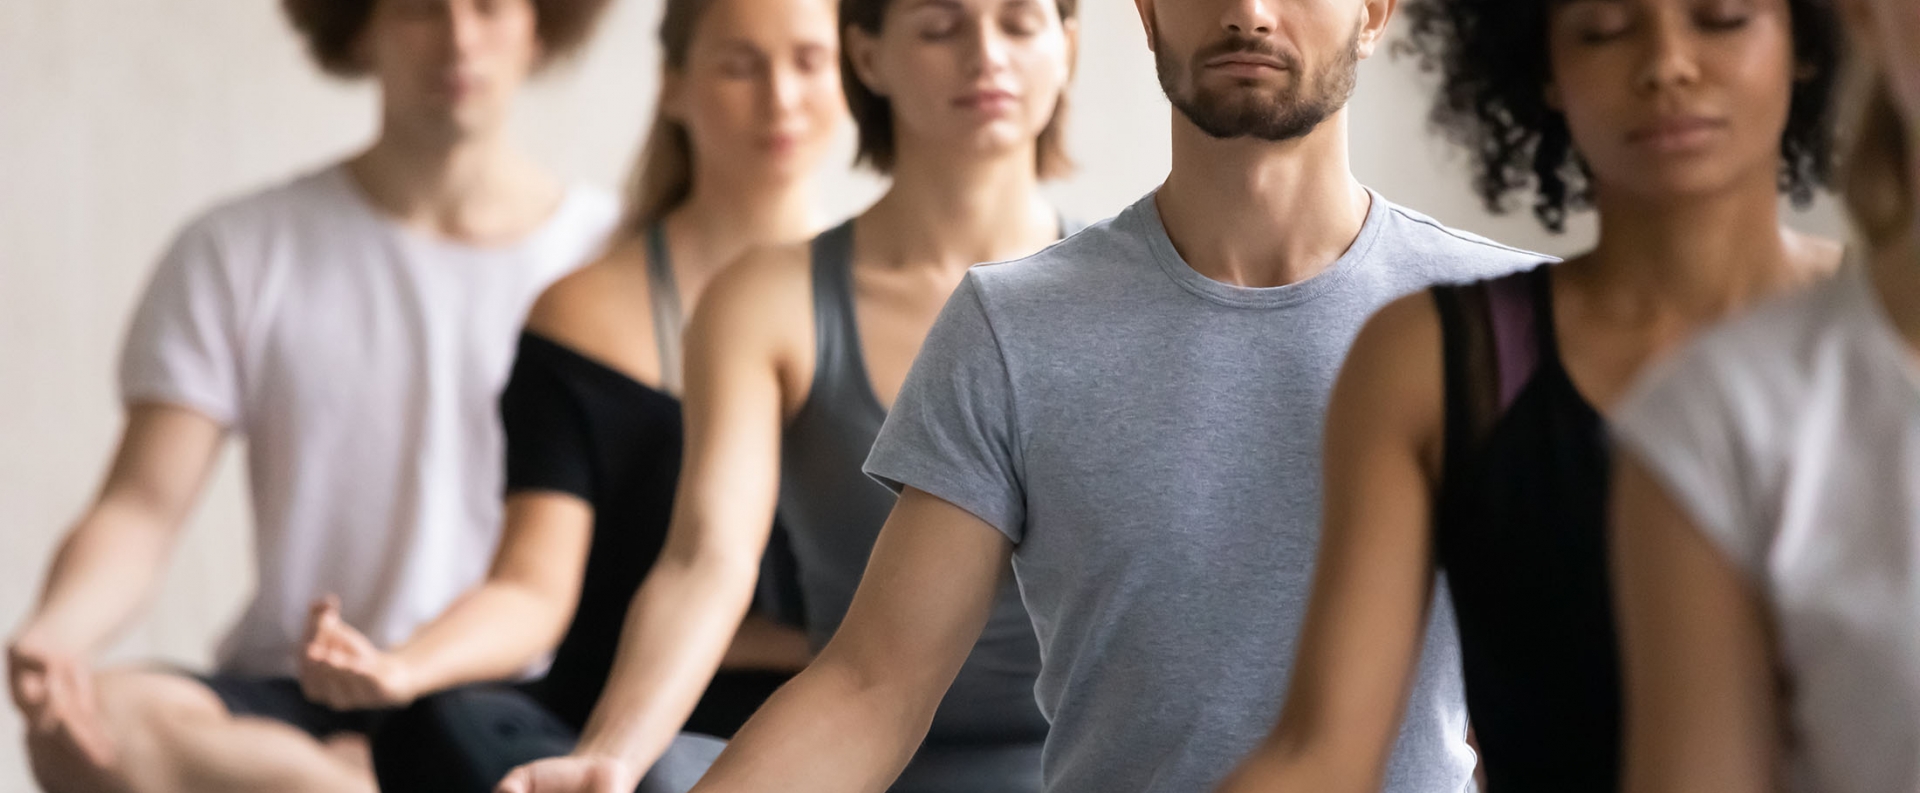 Group of diverse people meditating together visualizing during yoga morning session